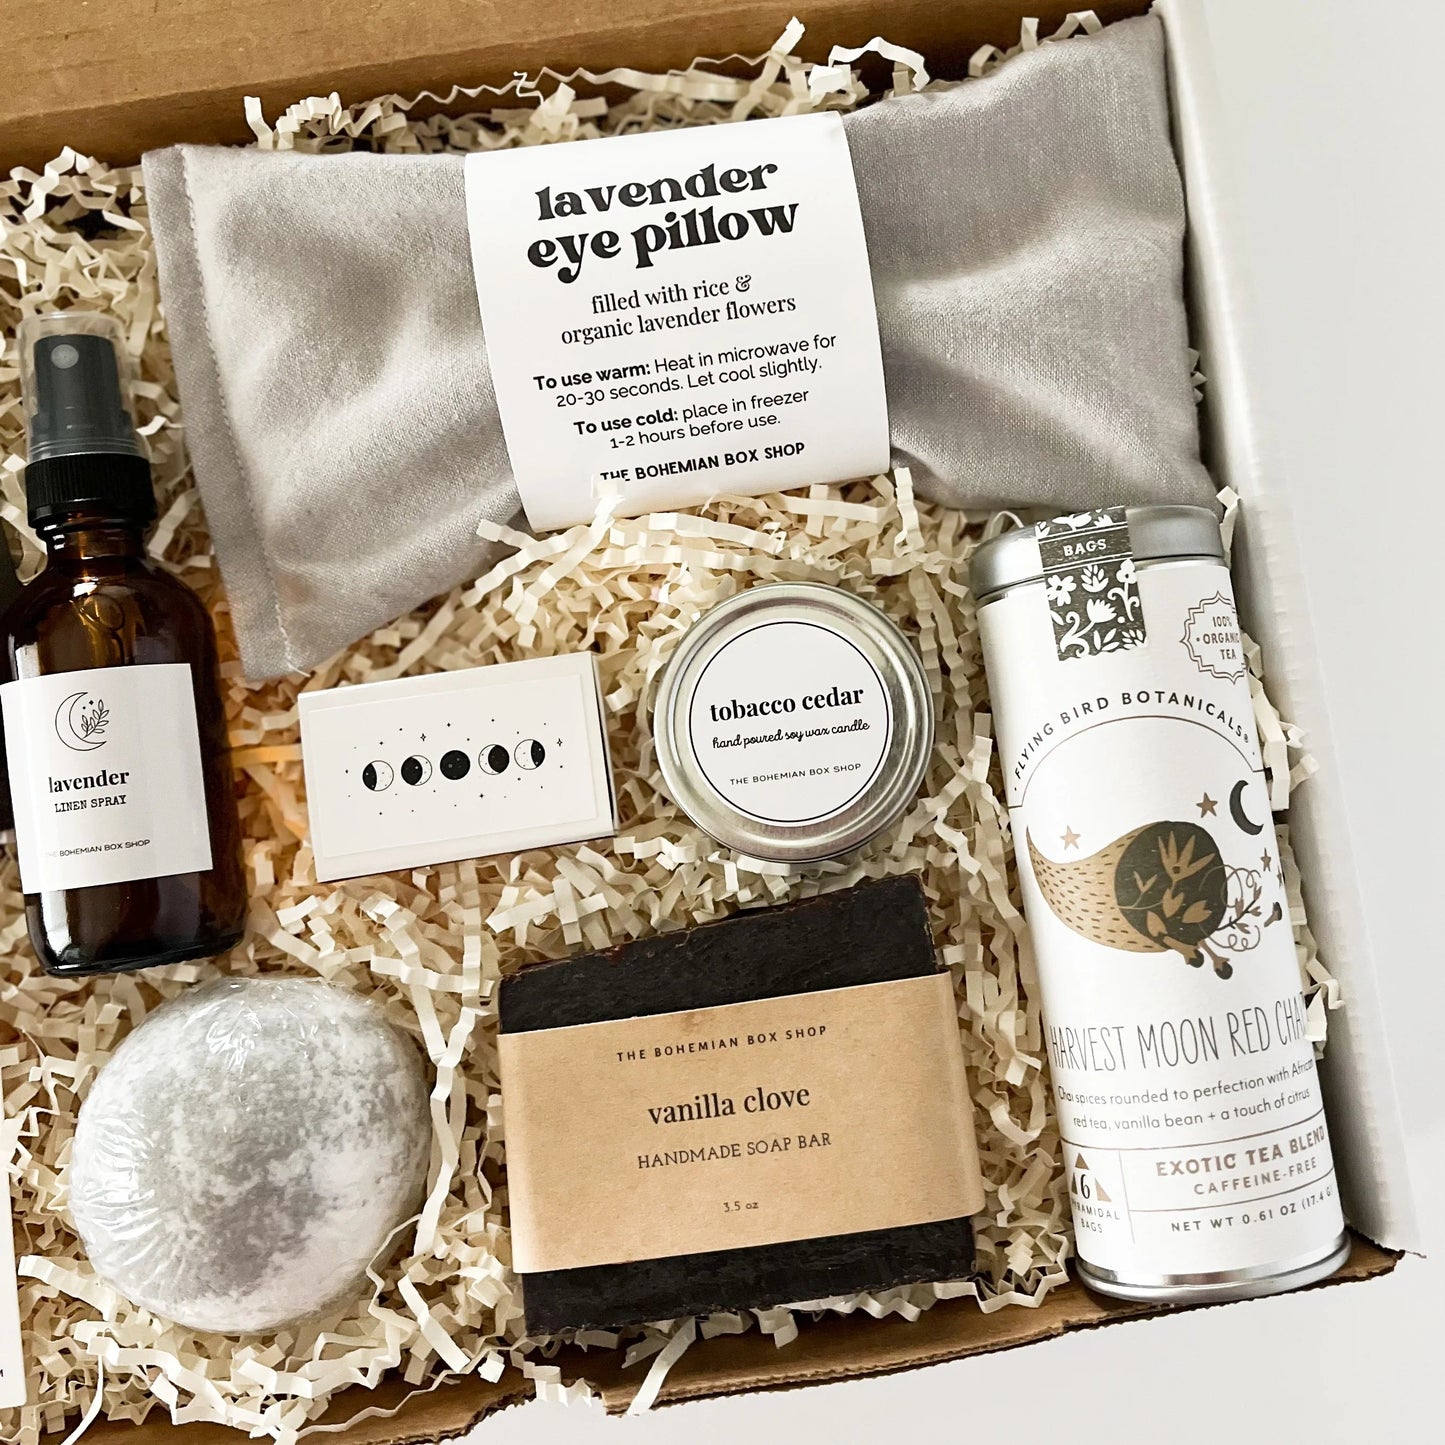 Gender Neutral Grounding Gift Set for Men or Women. Includes gray, black and white self-care items 